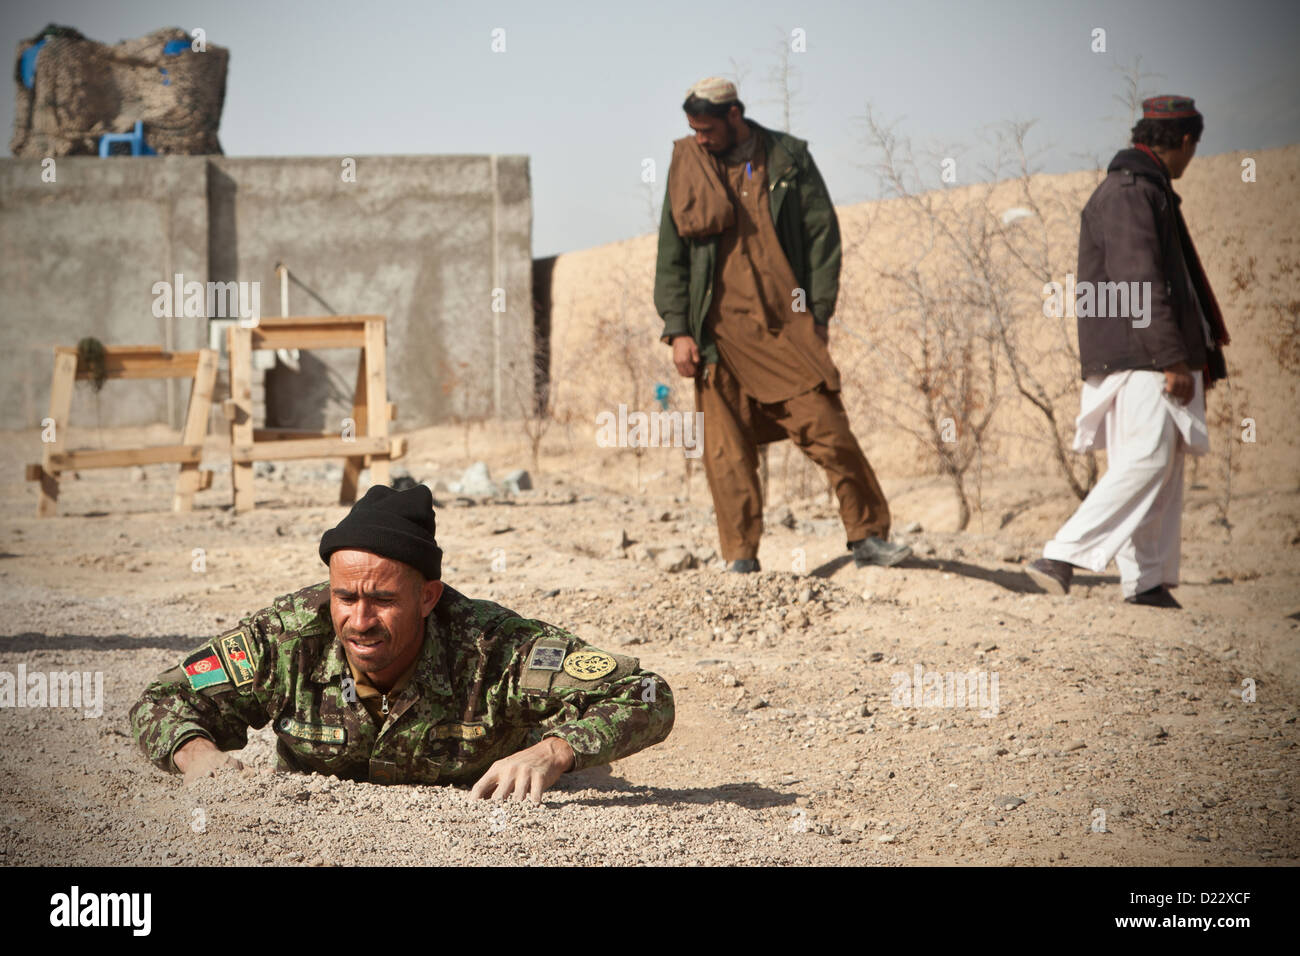 An Afghan National Army Soldier demonstrates counter improvised explosive device tactics during training in Farah province, Afghanistan, Jan.10, 2013. Afghan National Security Forces have been taking the lead in security operations, with coalition forces Stock Photo